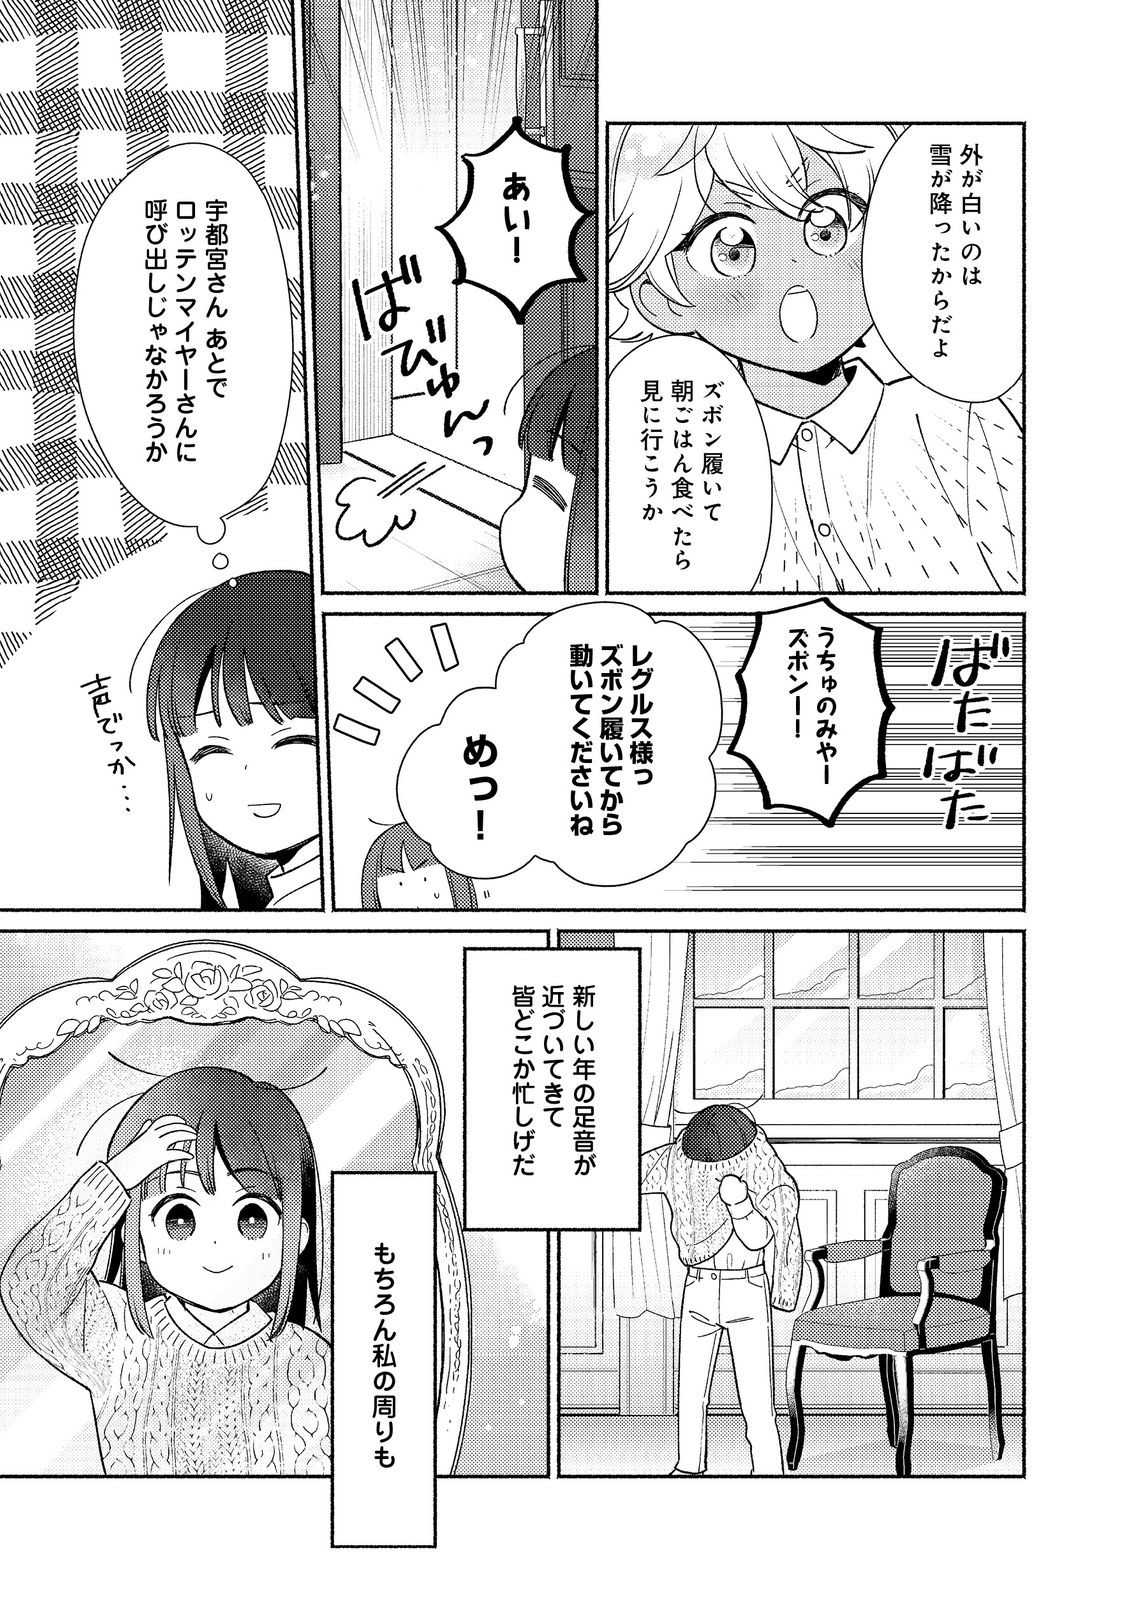 I’m the White Pig Nobleman 第23.2話 - Page 6